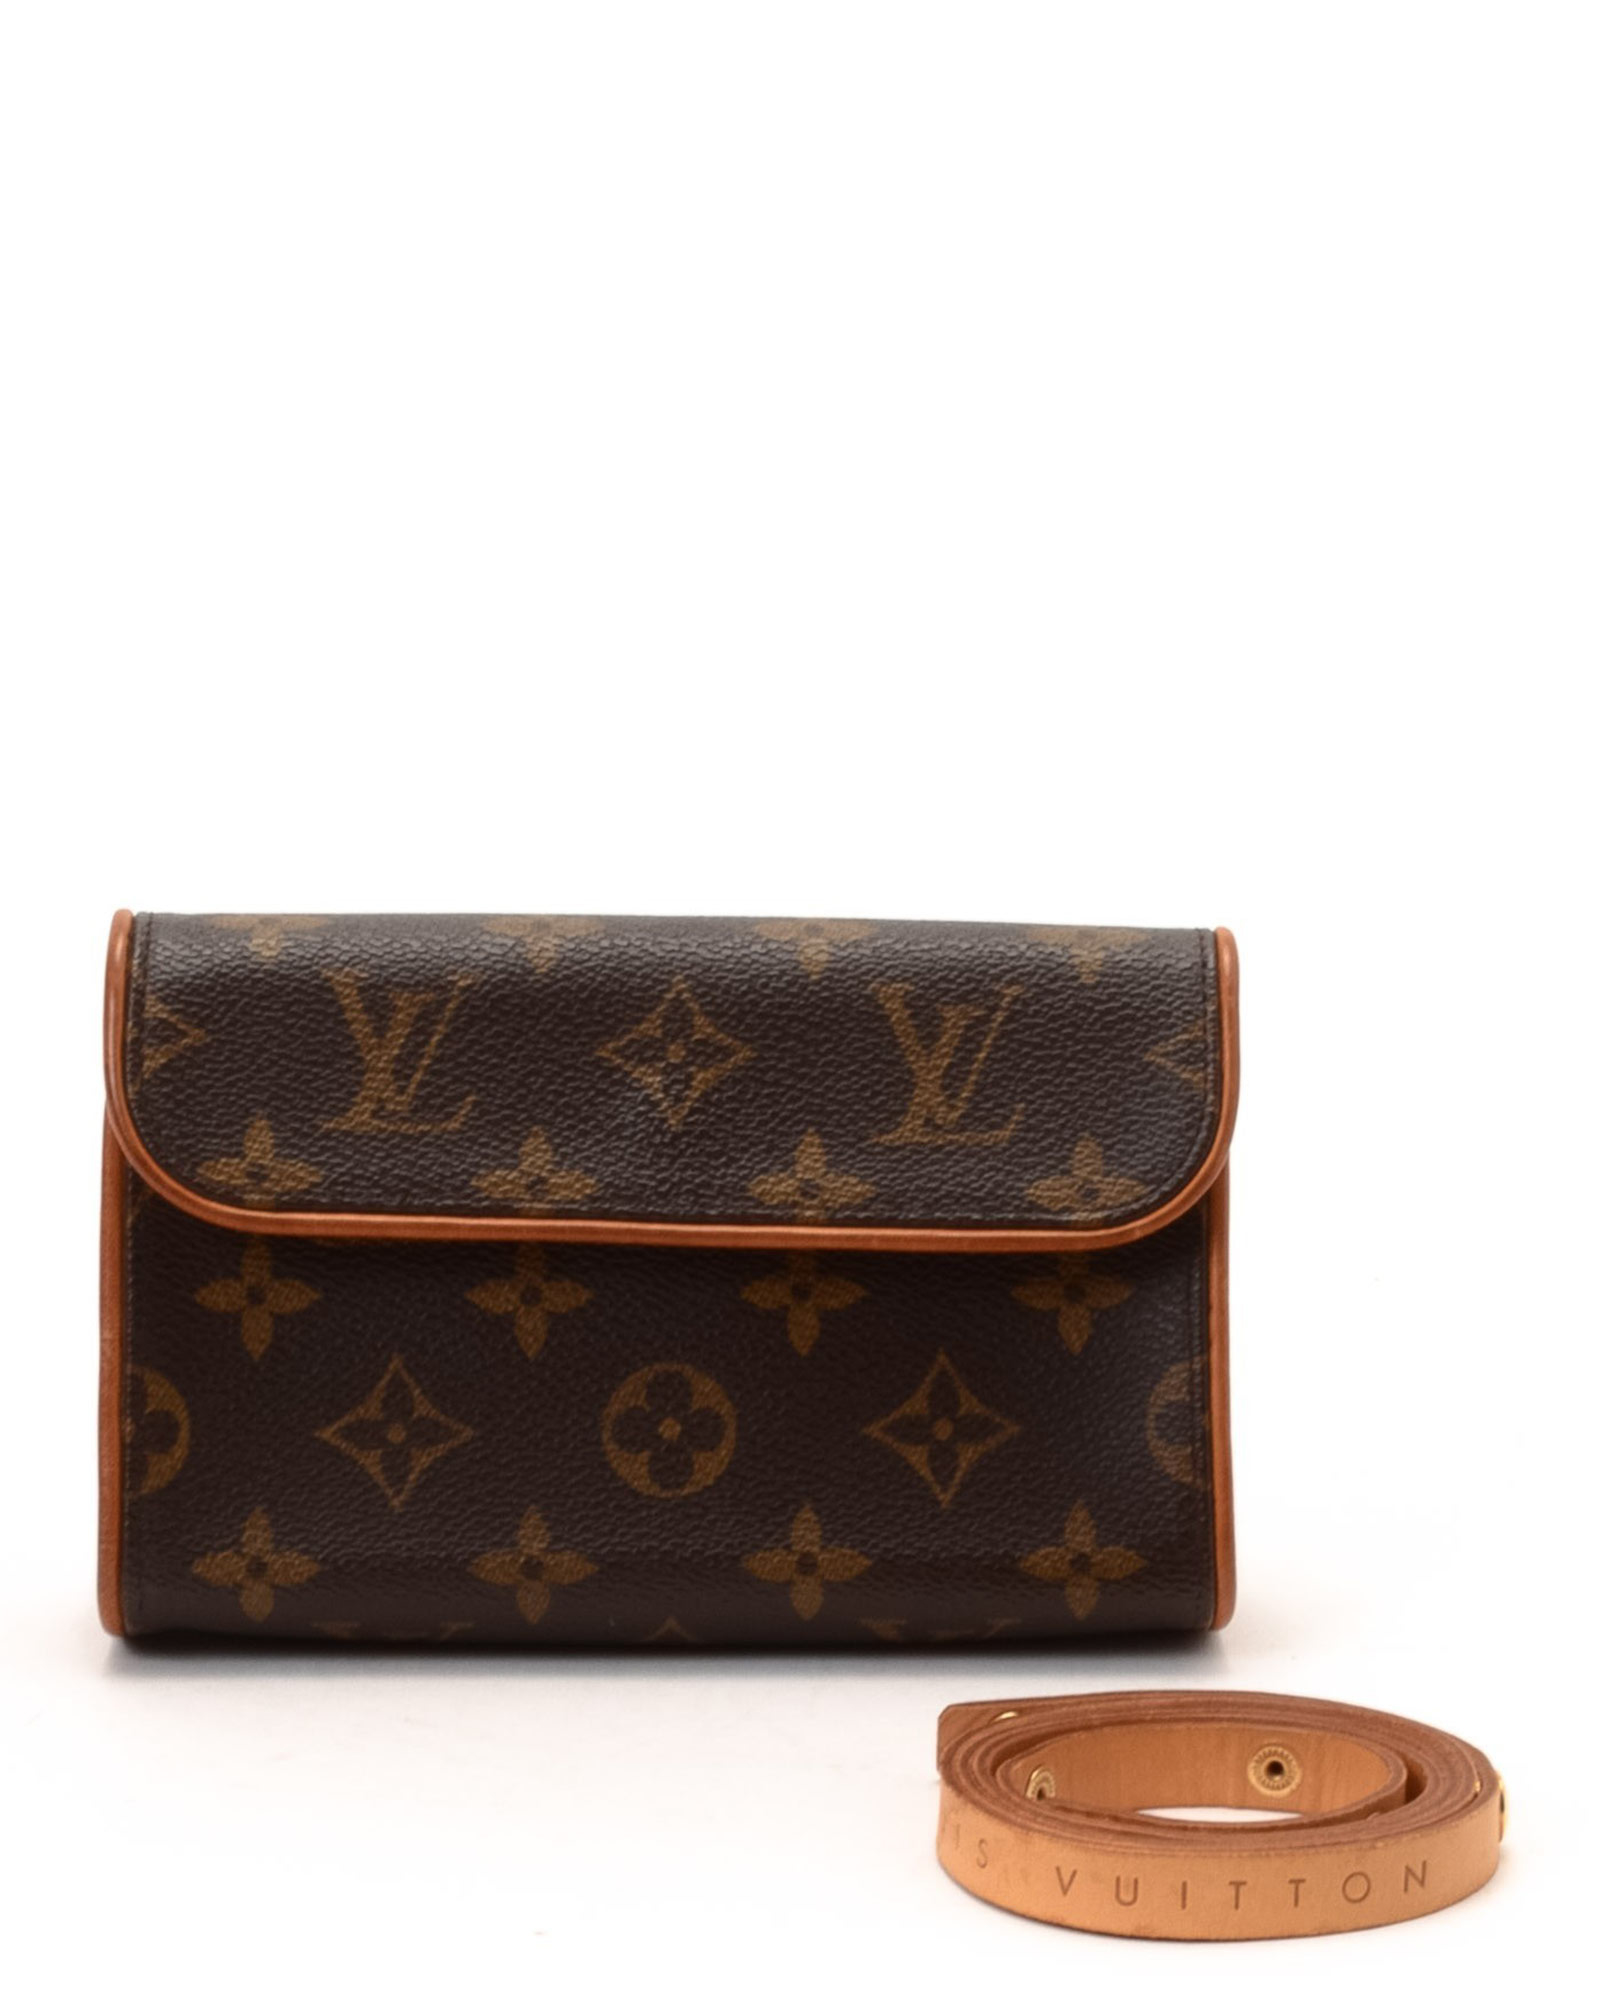 Lowe Vuitton Bags | Confederated Tribes of the Umatilla Indian Reservation